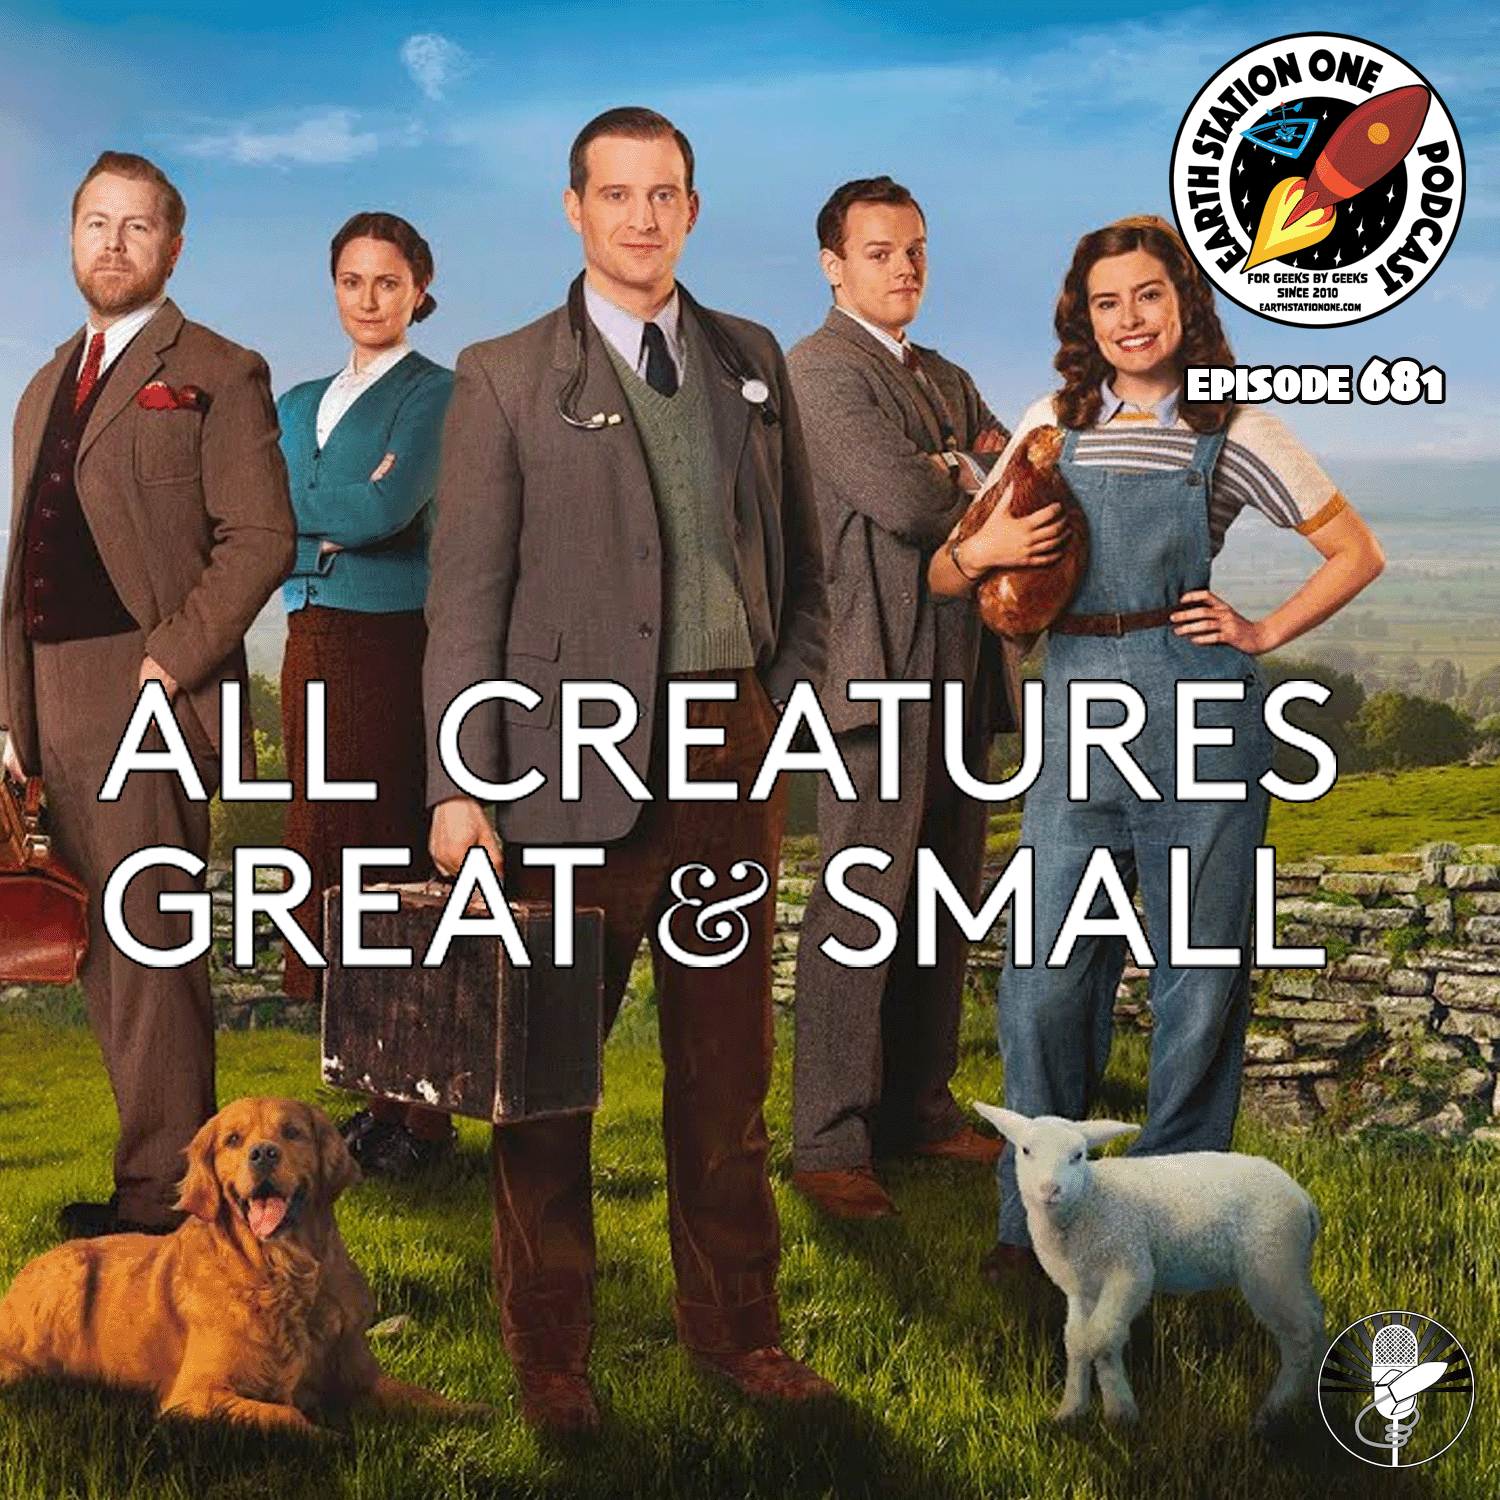 The Earth Station One Podcast Ep 681- All Creatures Great & Small Series Review